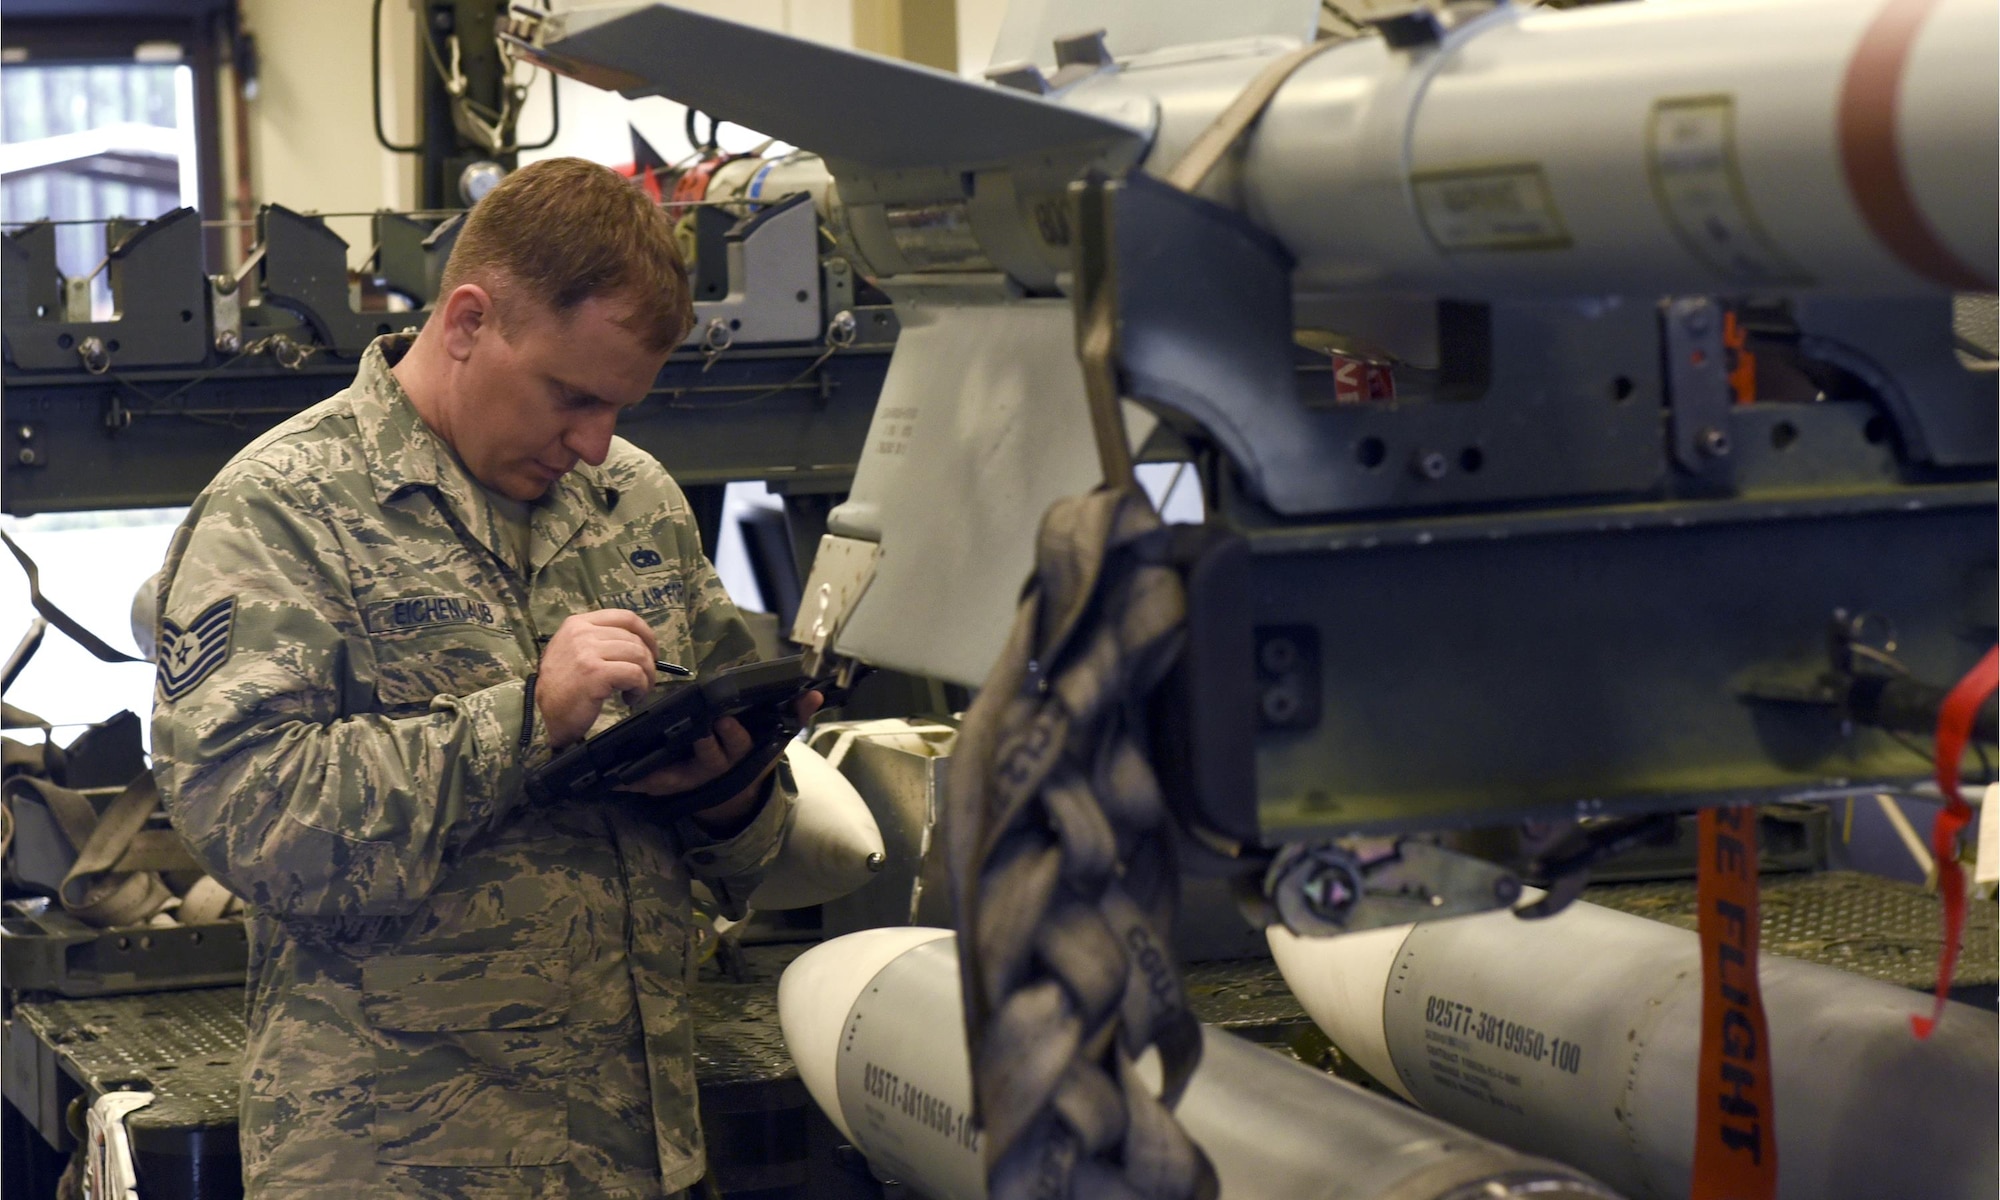 U.S. Air Force Tech. Sgt. Richard Eichenlaub, 325th Maintenance Squadron munitions systems specialist, performs an accountability check of ordnance on a weapons rack at Tyndall Air Force Base, Fla., Dec. 14, 2016. The 325th Fighter Wing houses an arsenal of some of the most advanced weapons in the world as a base with fifth-generation fighters. The responsibility of munitions systems specialists is to assemble and process these powerful non-nuclear munitions. (U.S. Air Force photo by Airman 1st Class Cody R. Miller/Released)
